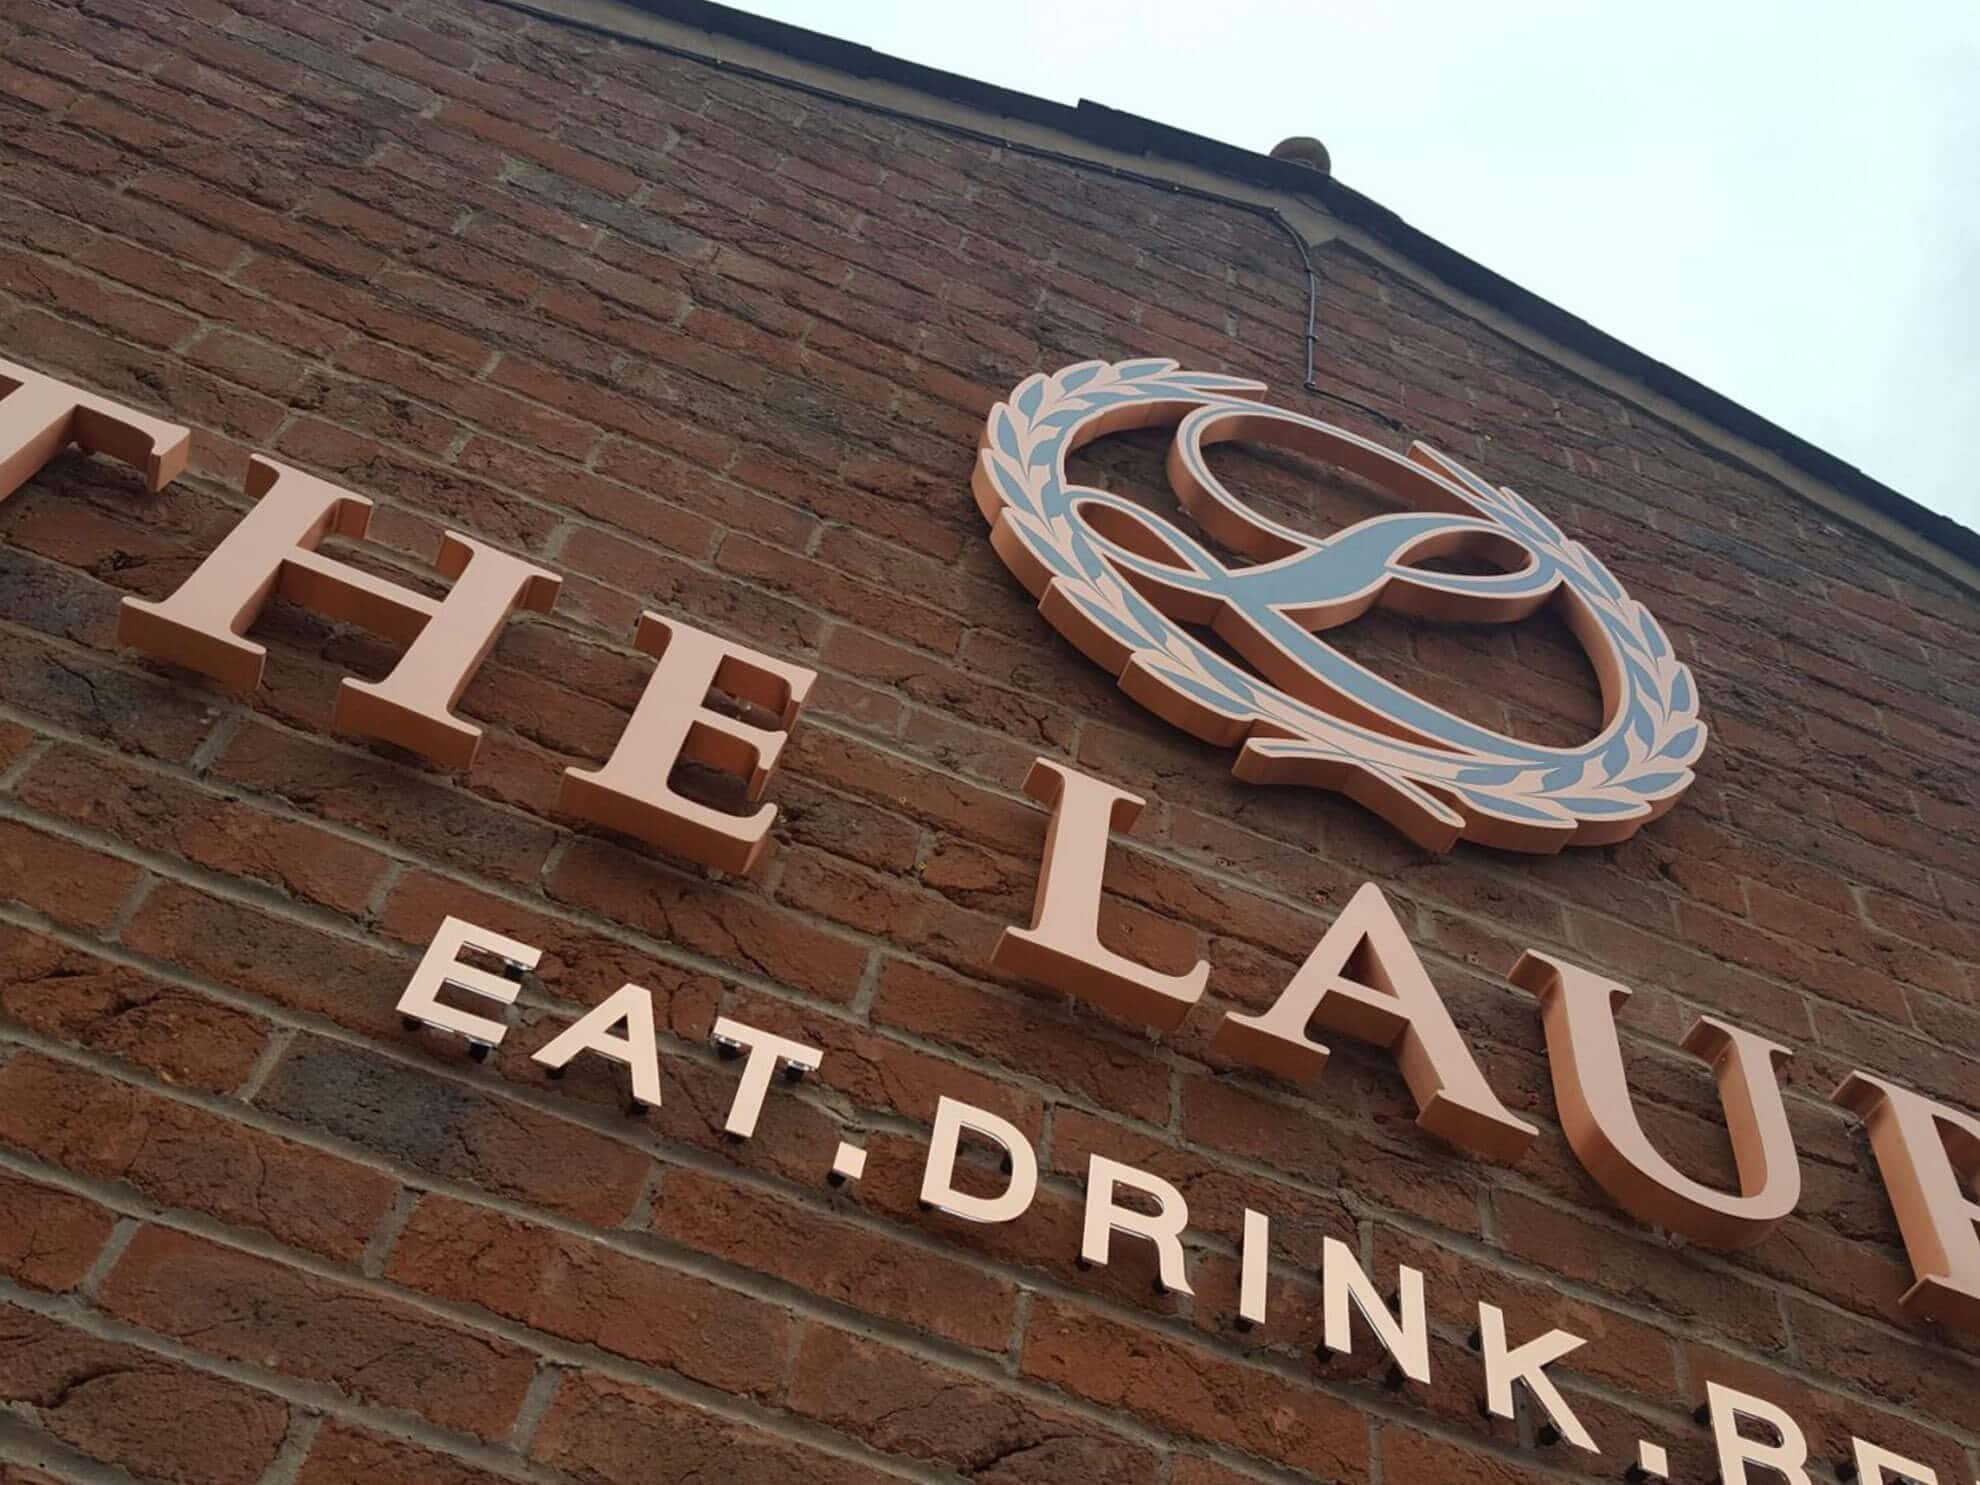 The Laurels sign - Halo illuminated premium build up 3D letters and logo with flat cut copper letters on stand off locators